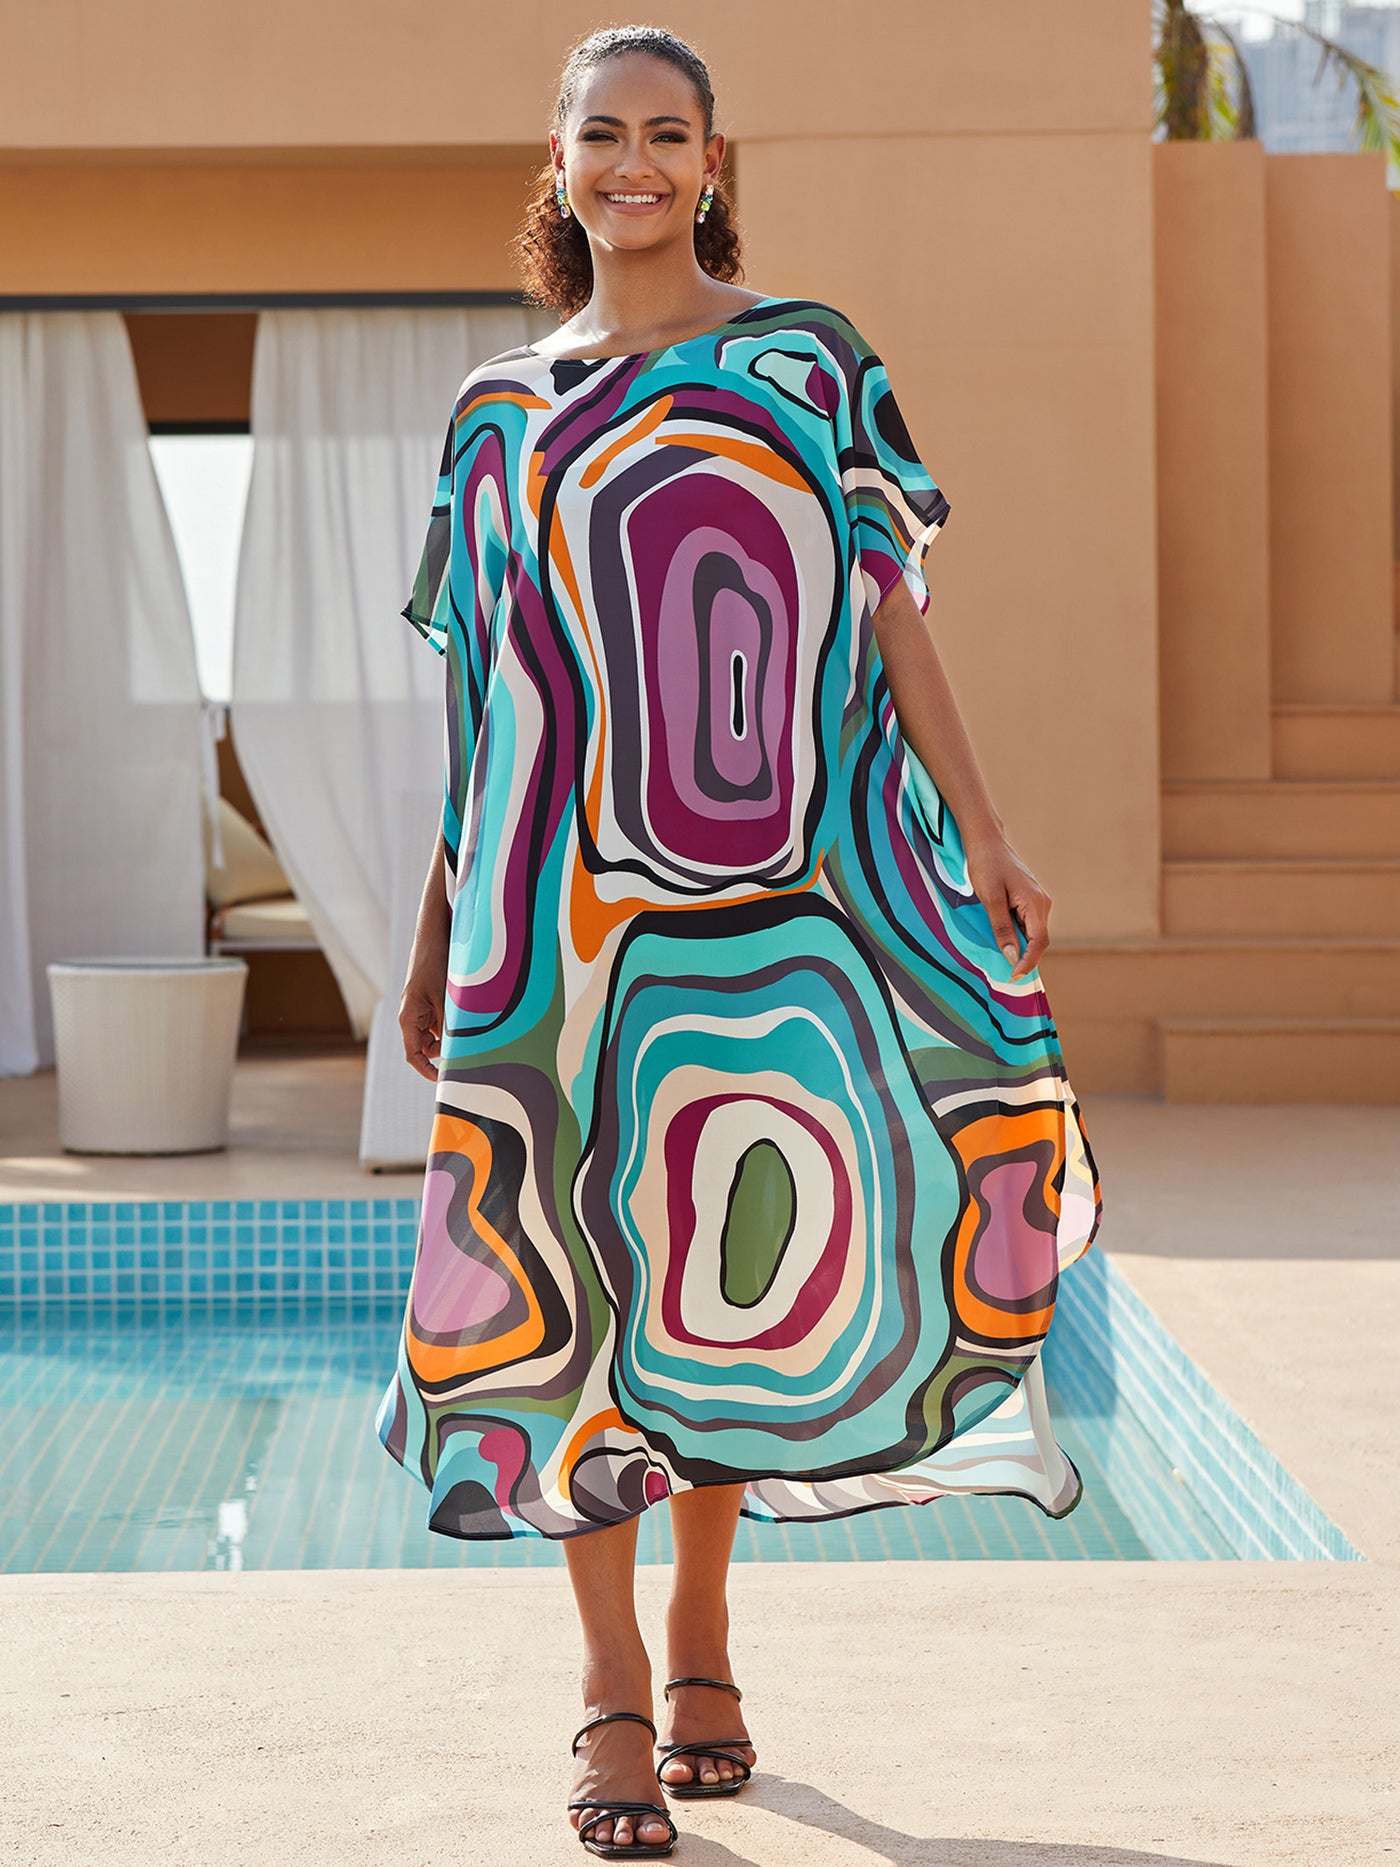 Plus Size Bathing Suit Cover Up for Women Colorful Printed Kaftan Casual Short Sleeve Robe Crew Neck Beach Dress Q1563